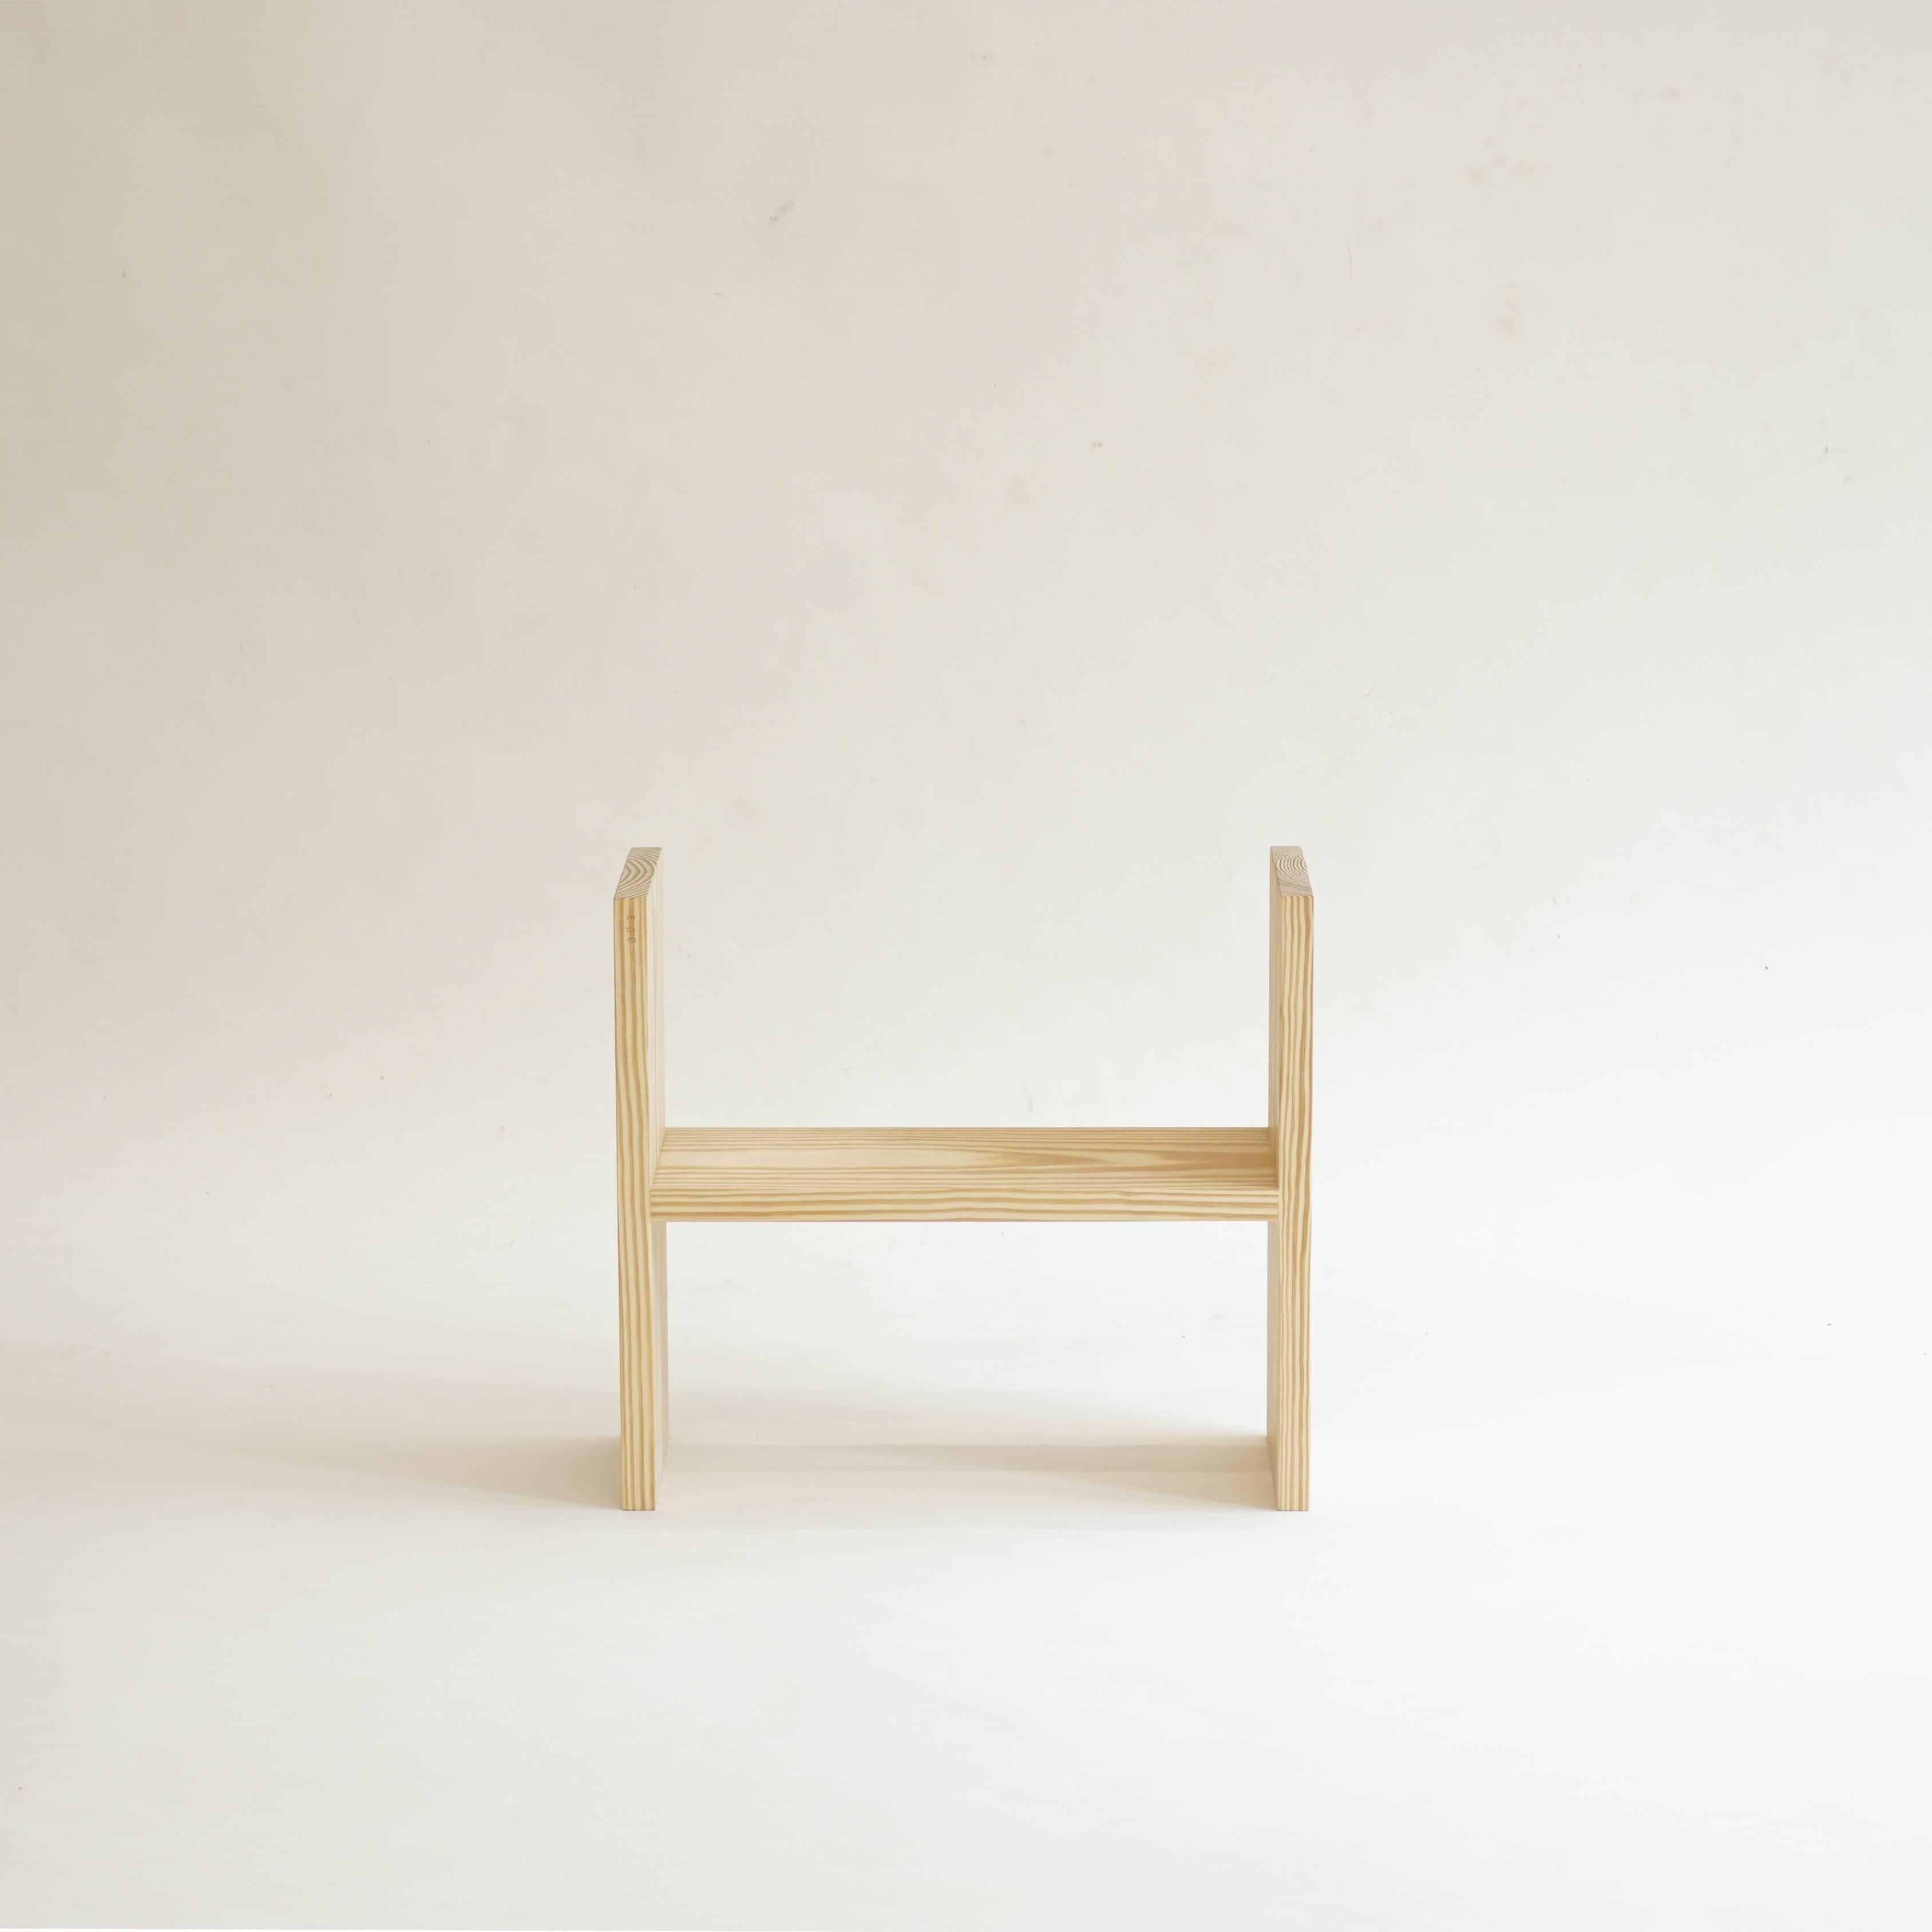 Alexa, designed by contemporary artist Sophie Nys, is a simple, low piece for various uses made in untreated yellow pine. Three wooden plates are connected to make an H-shaped object. It has no pre-defined direction, can be turned round and used